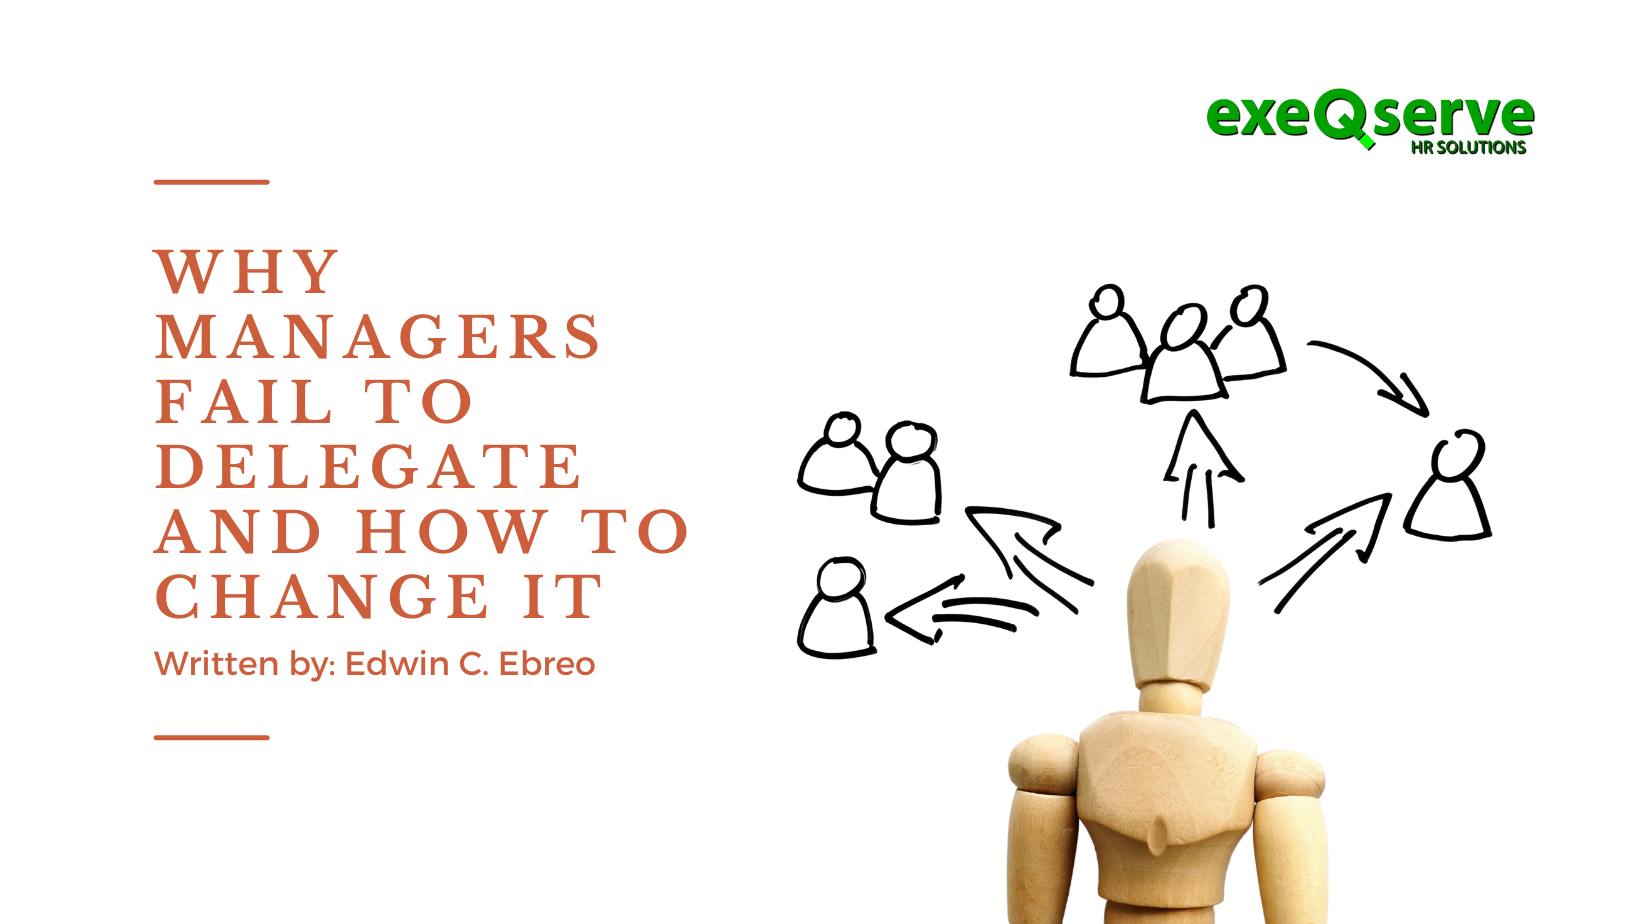 Why Managers Fail to Delegate and How to Change it